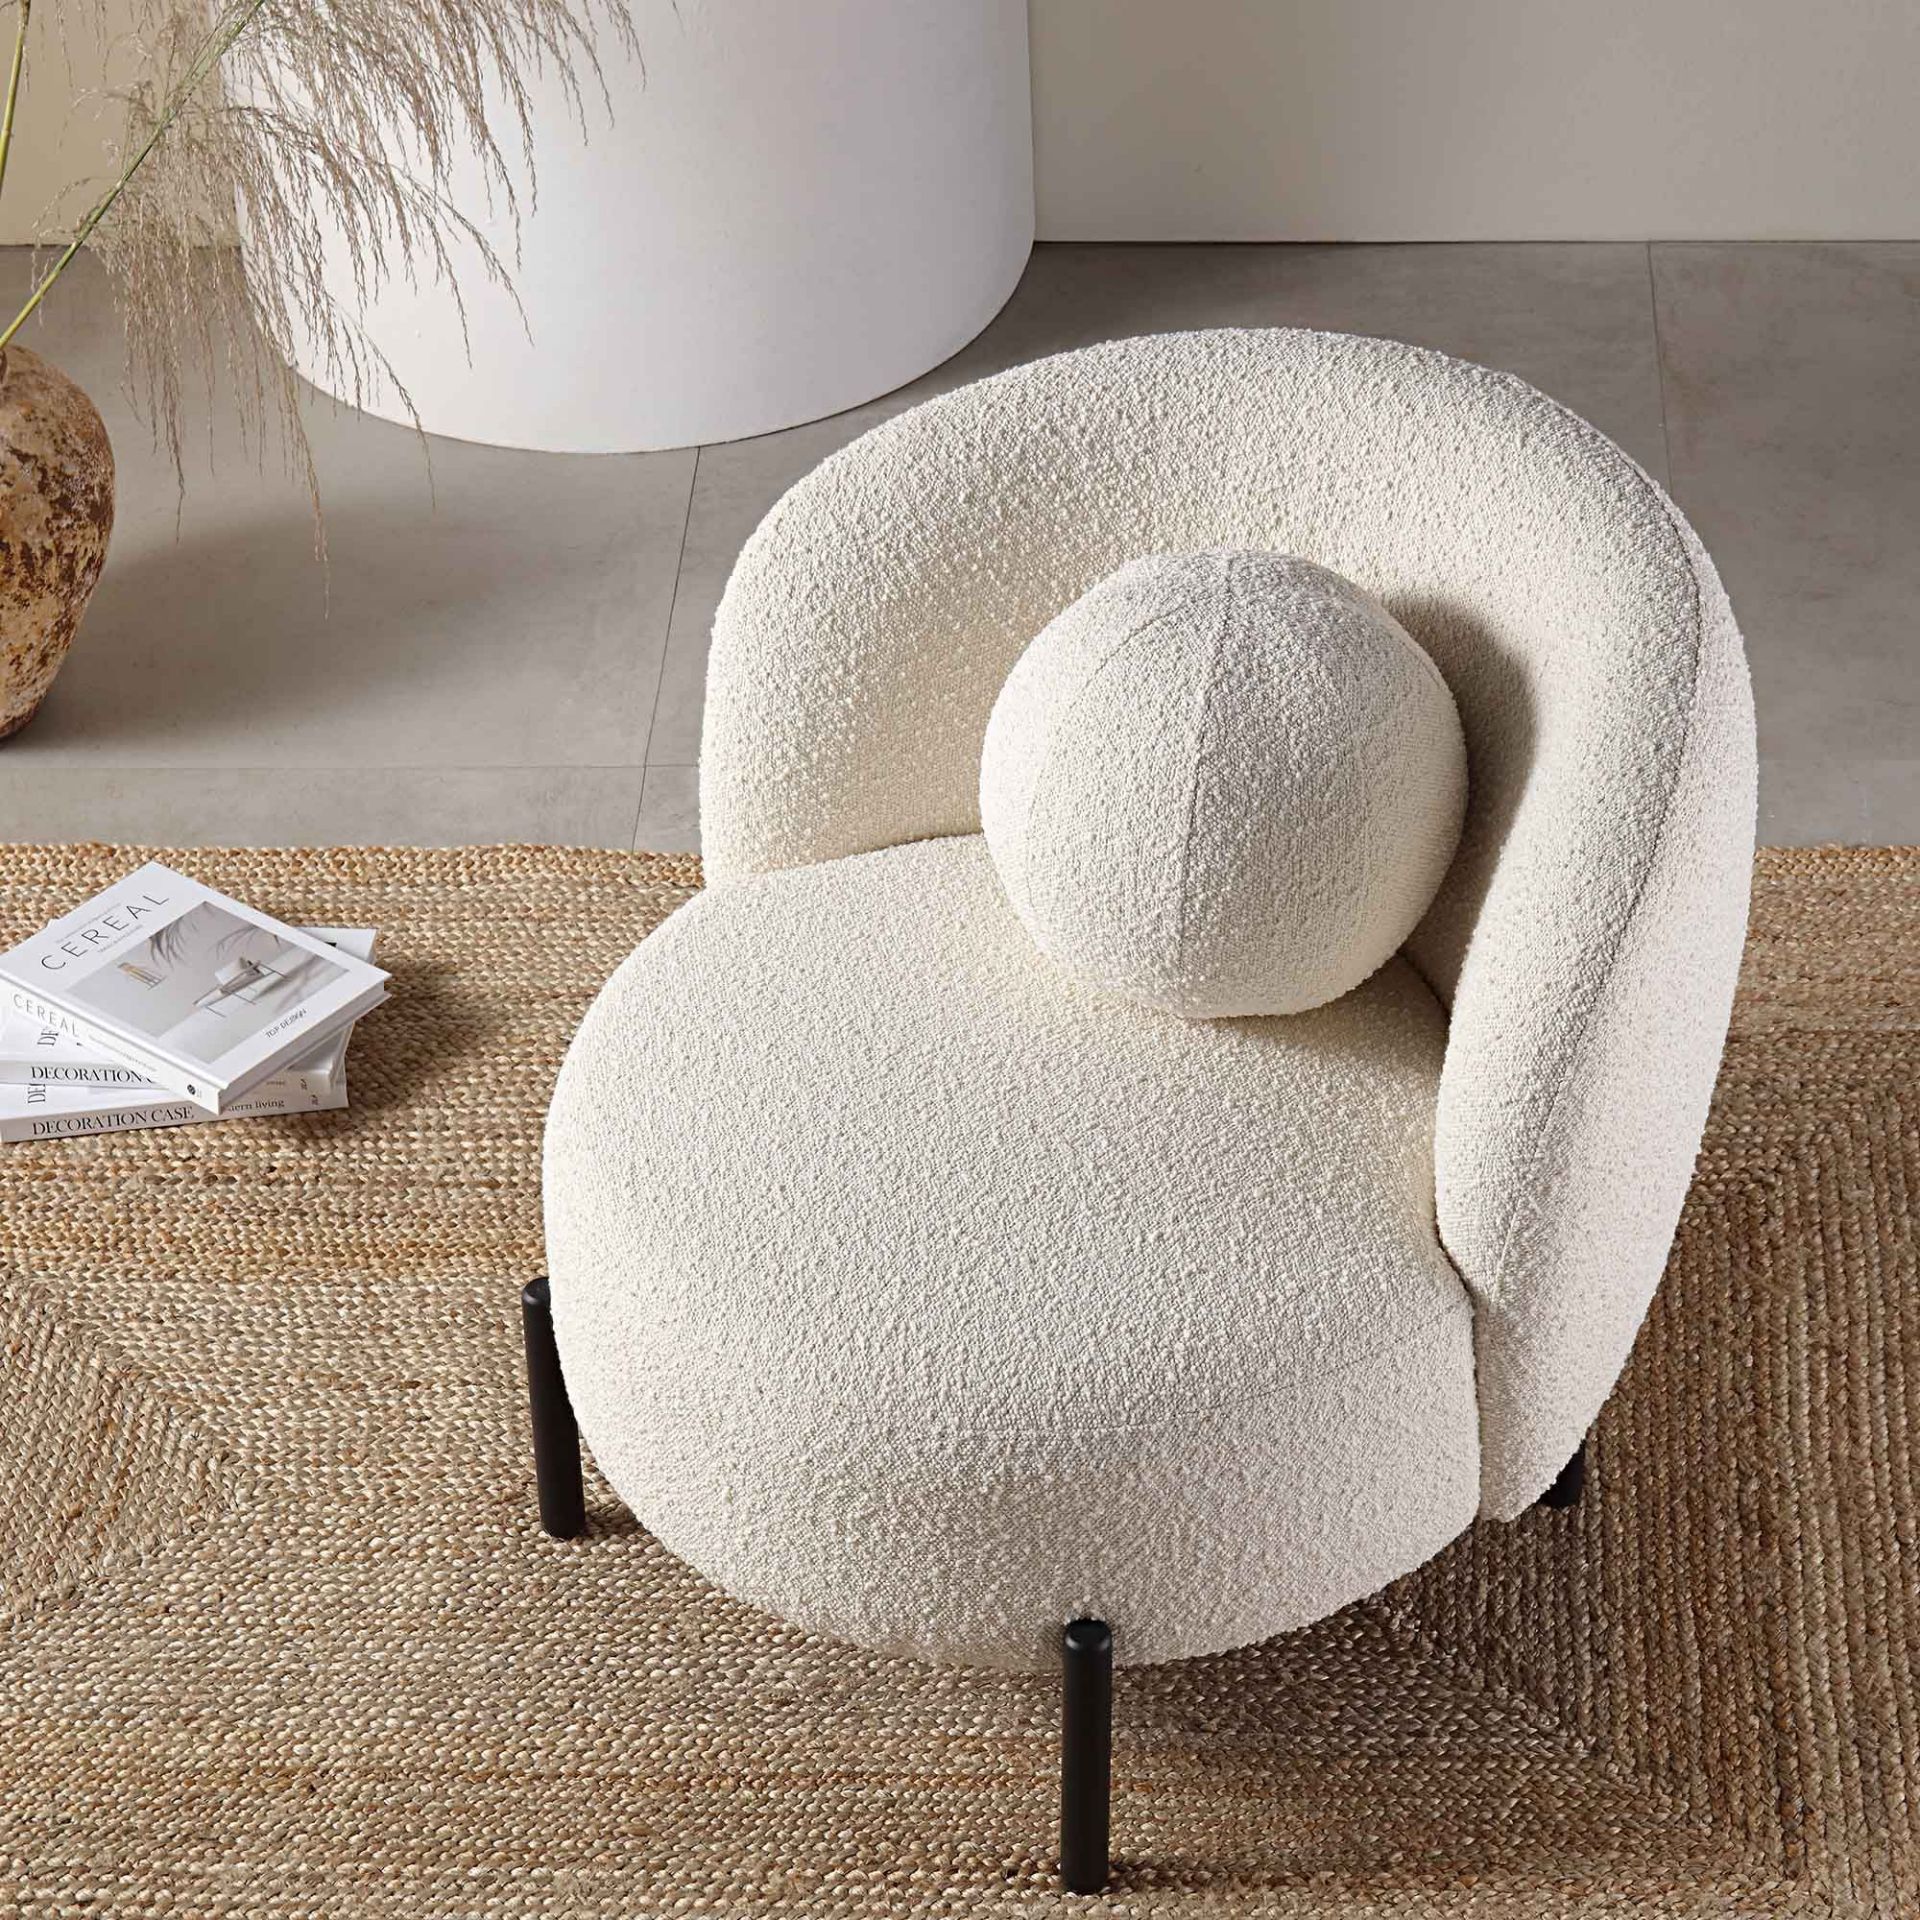 Amboise Armchair with Ball Cushion, Ecru Boucle. - R19.6. RRP £329.99. The Amboise armchair embraces - Image 2 of 2